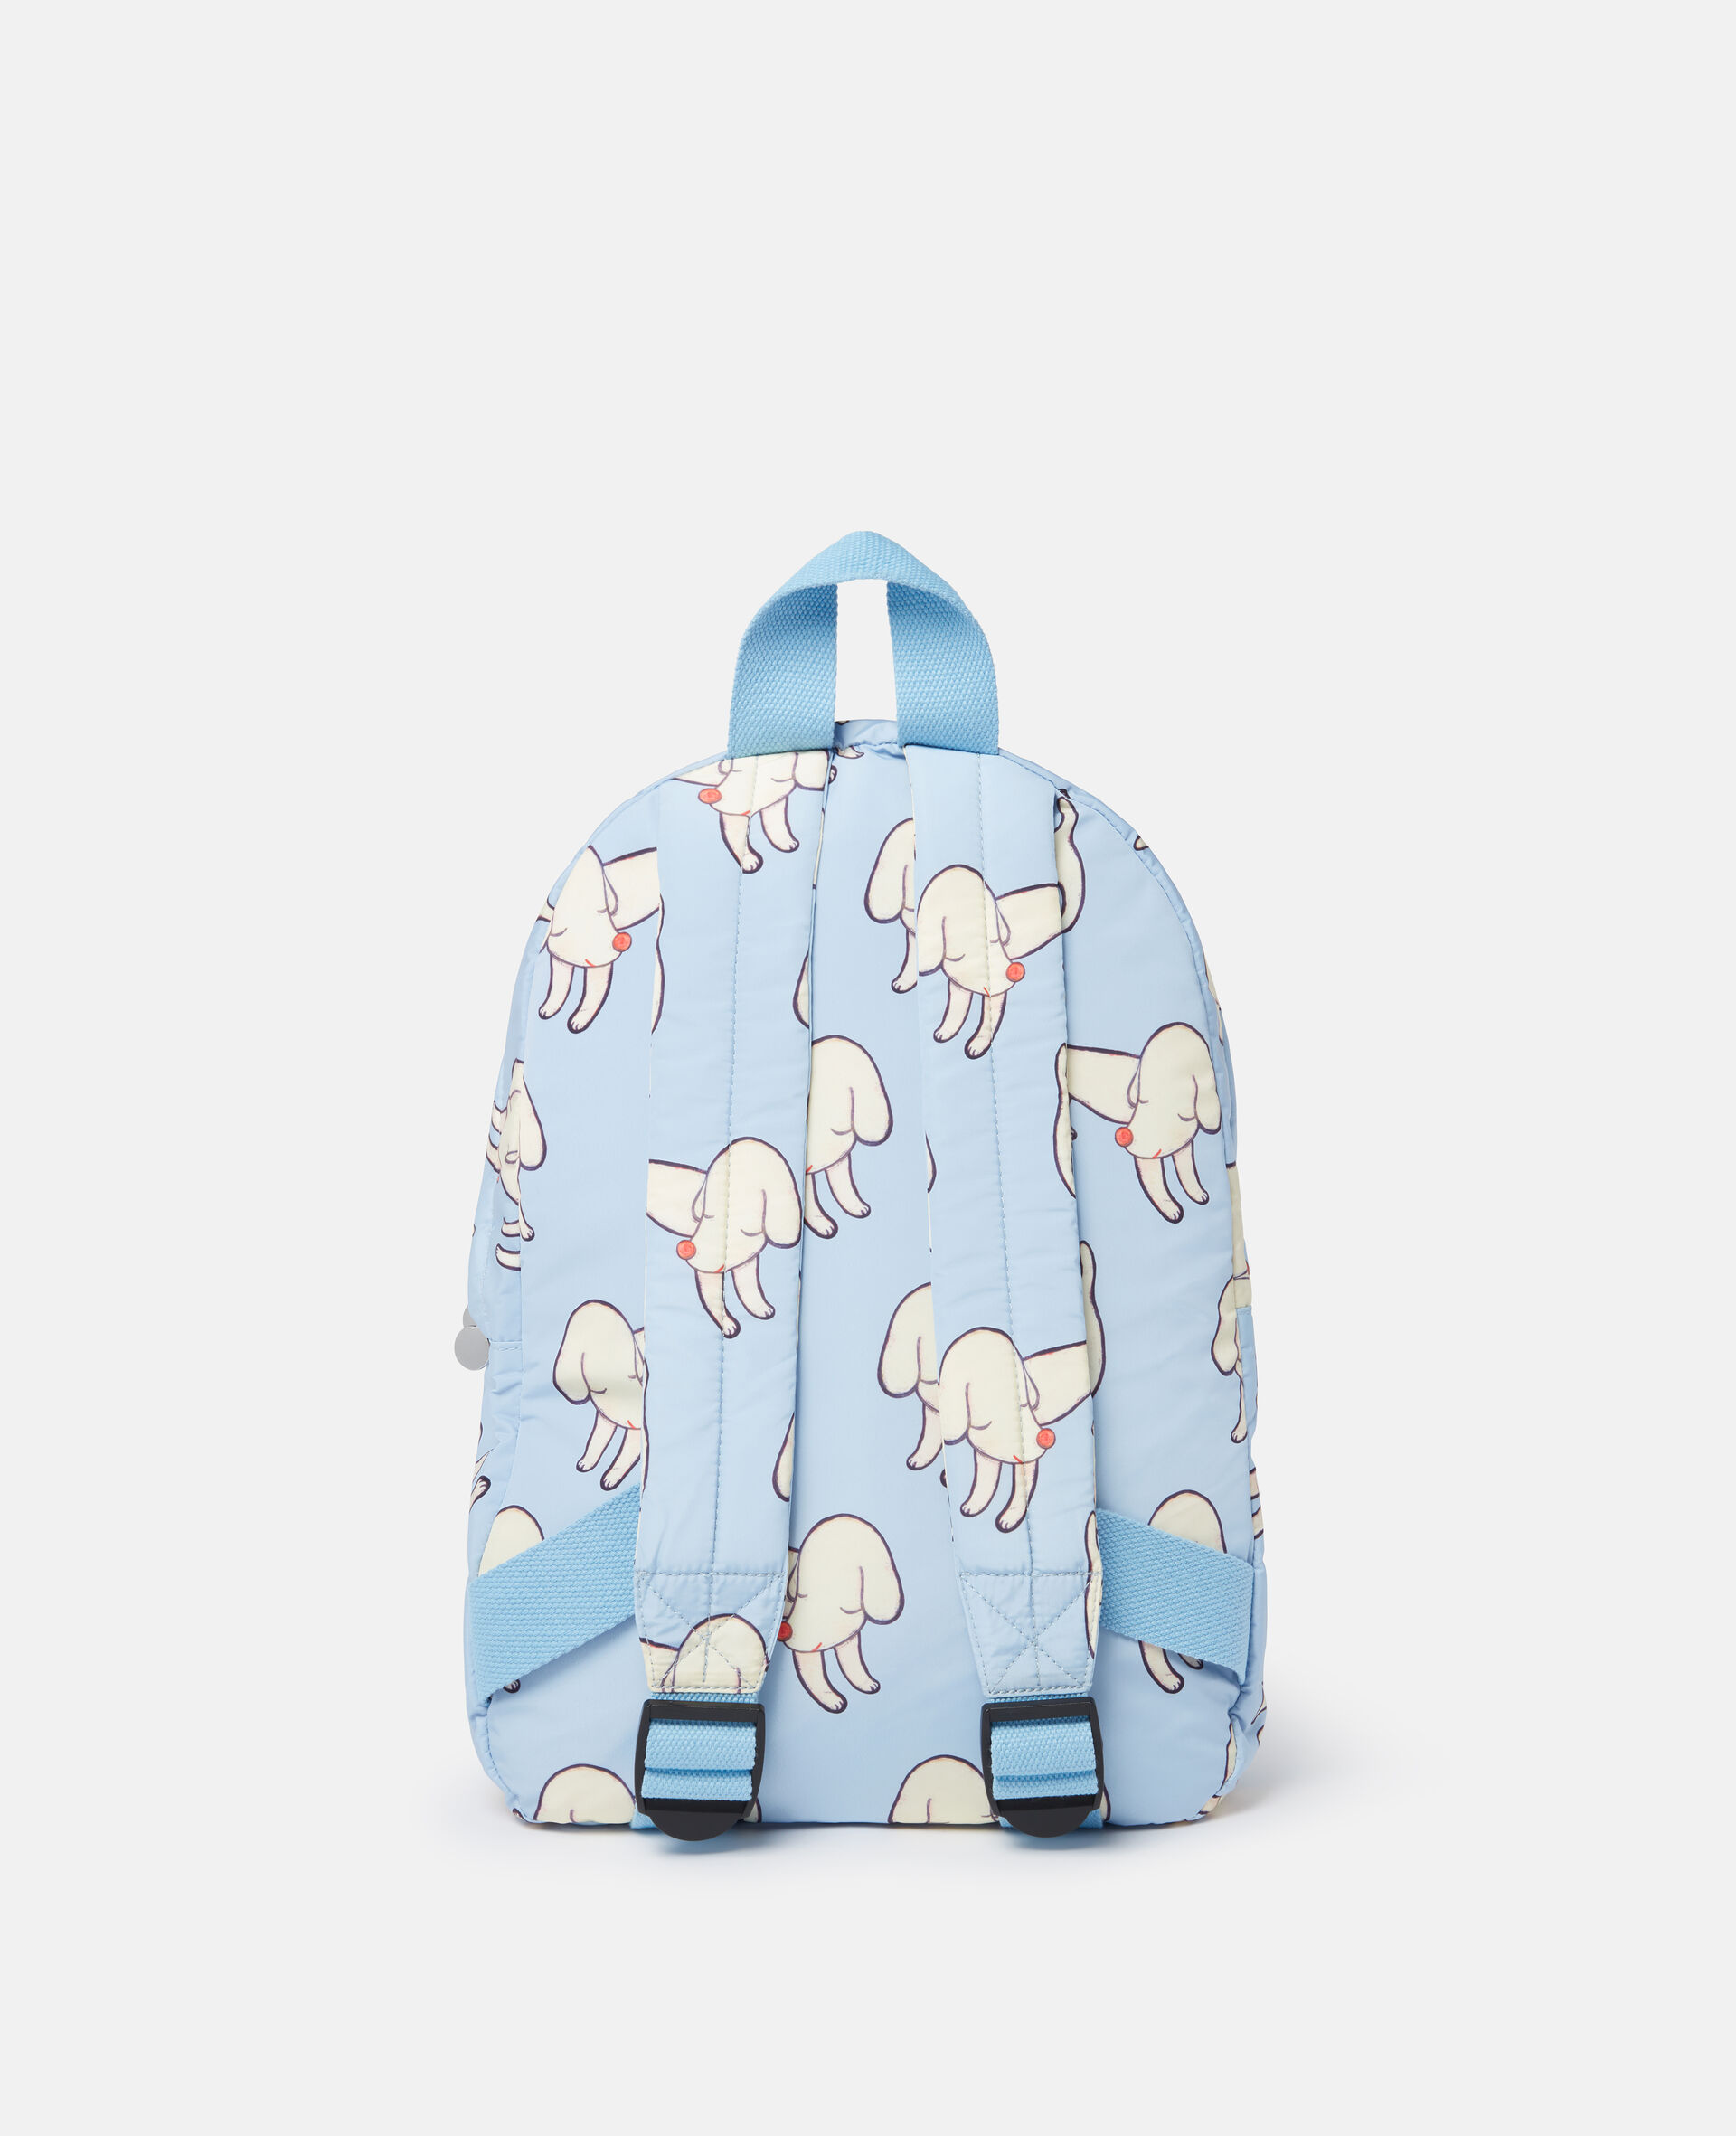 Lonesome Puppy Print Backpack-Multicolour-large image number 1